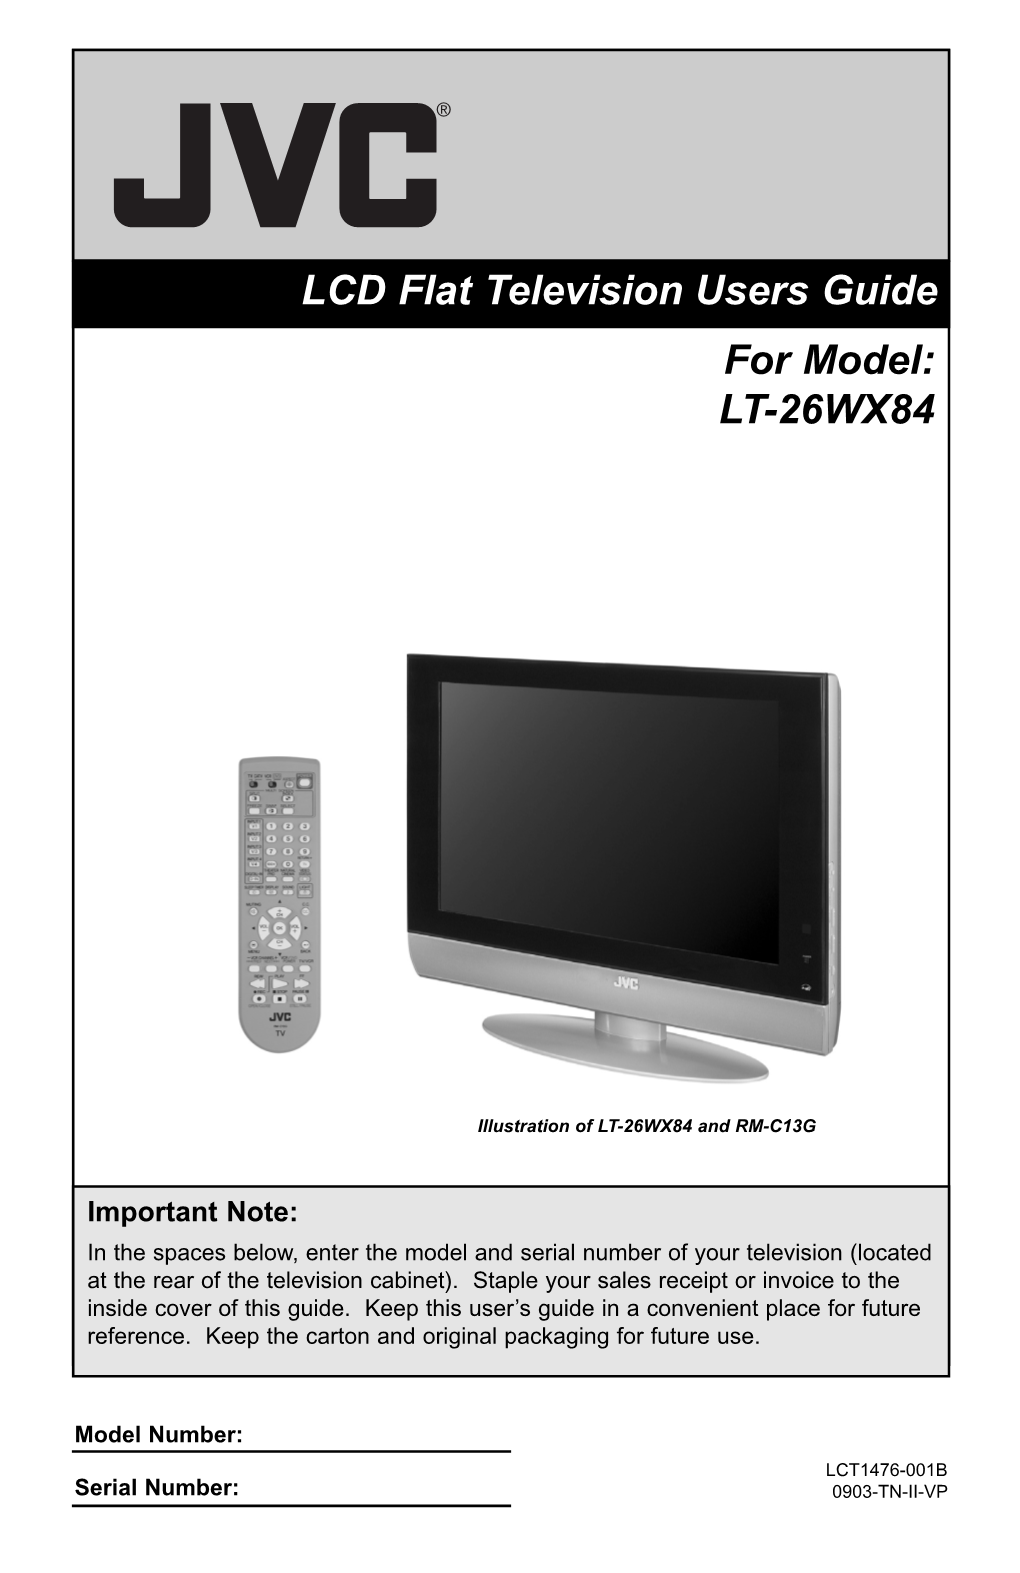 For Model: LT-26WX84 LCD Flat Television Users Guide